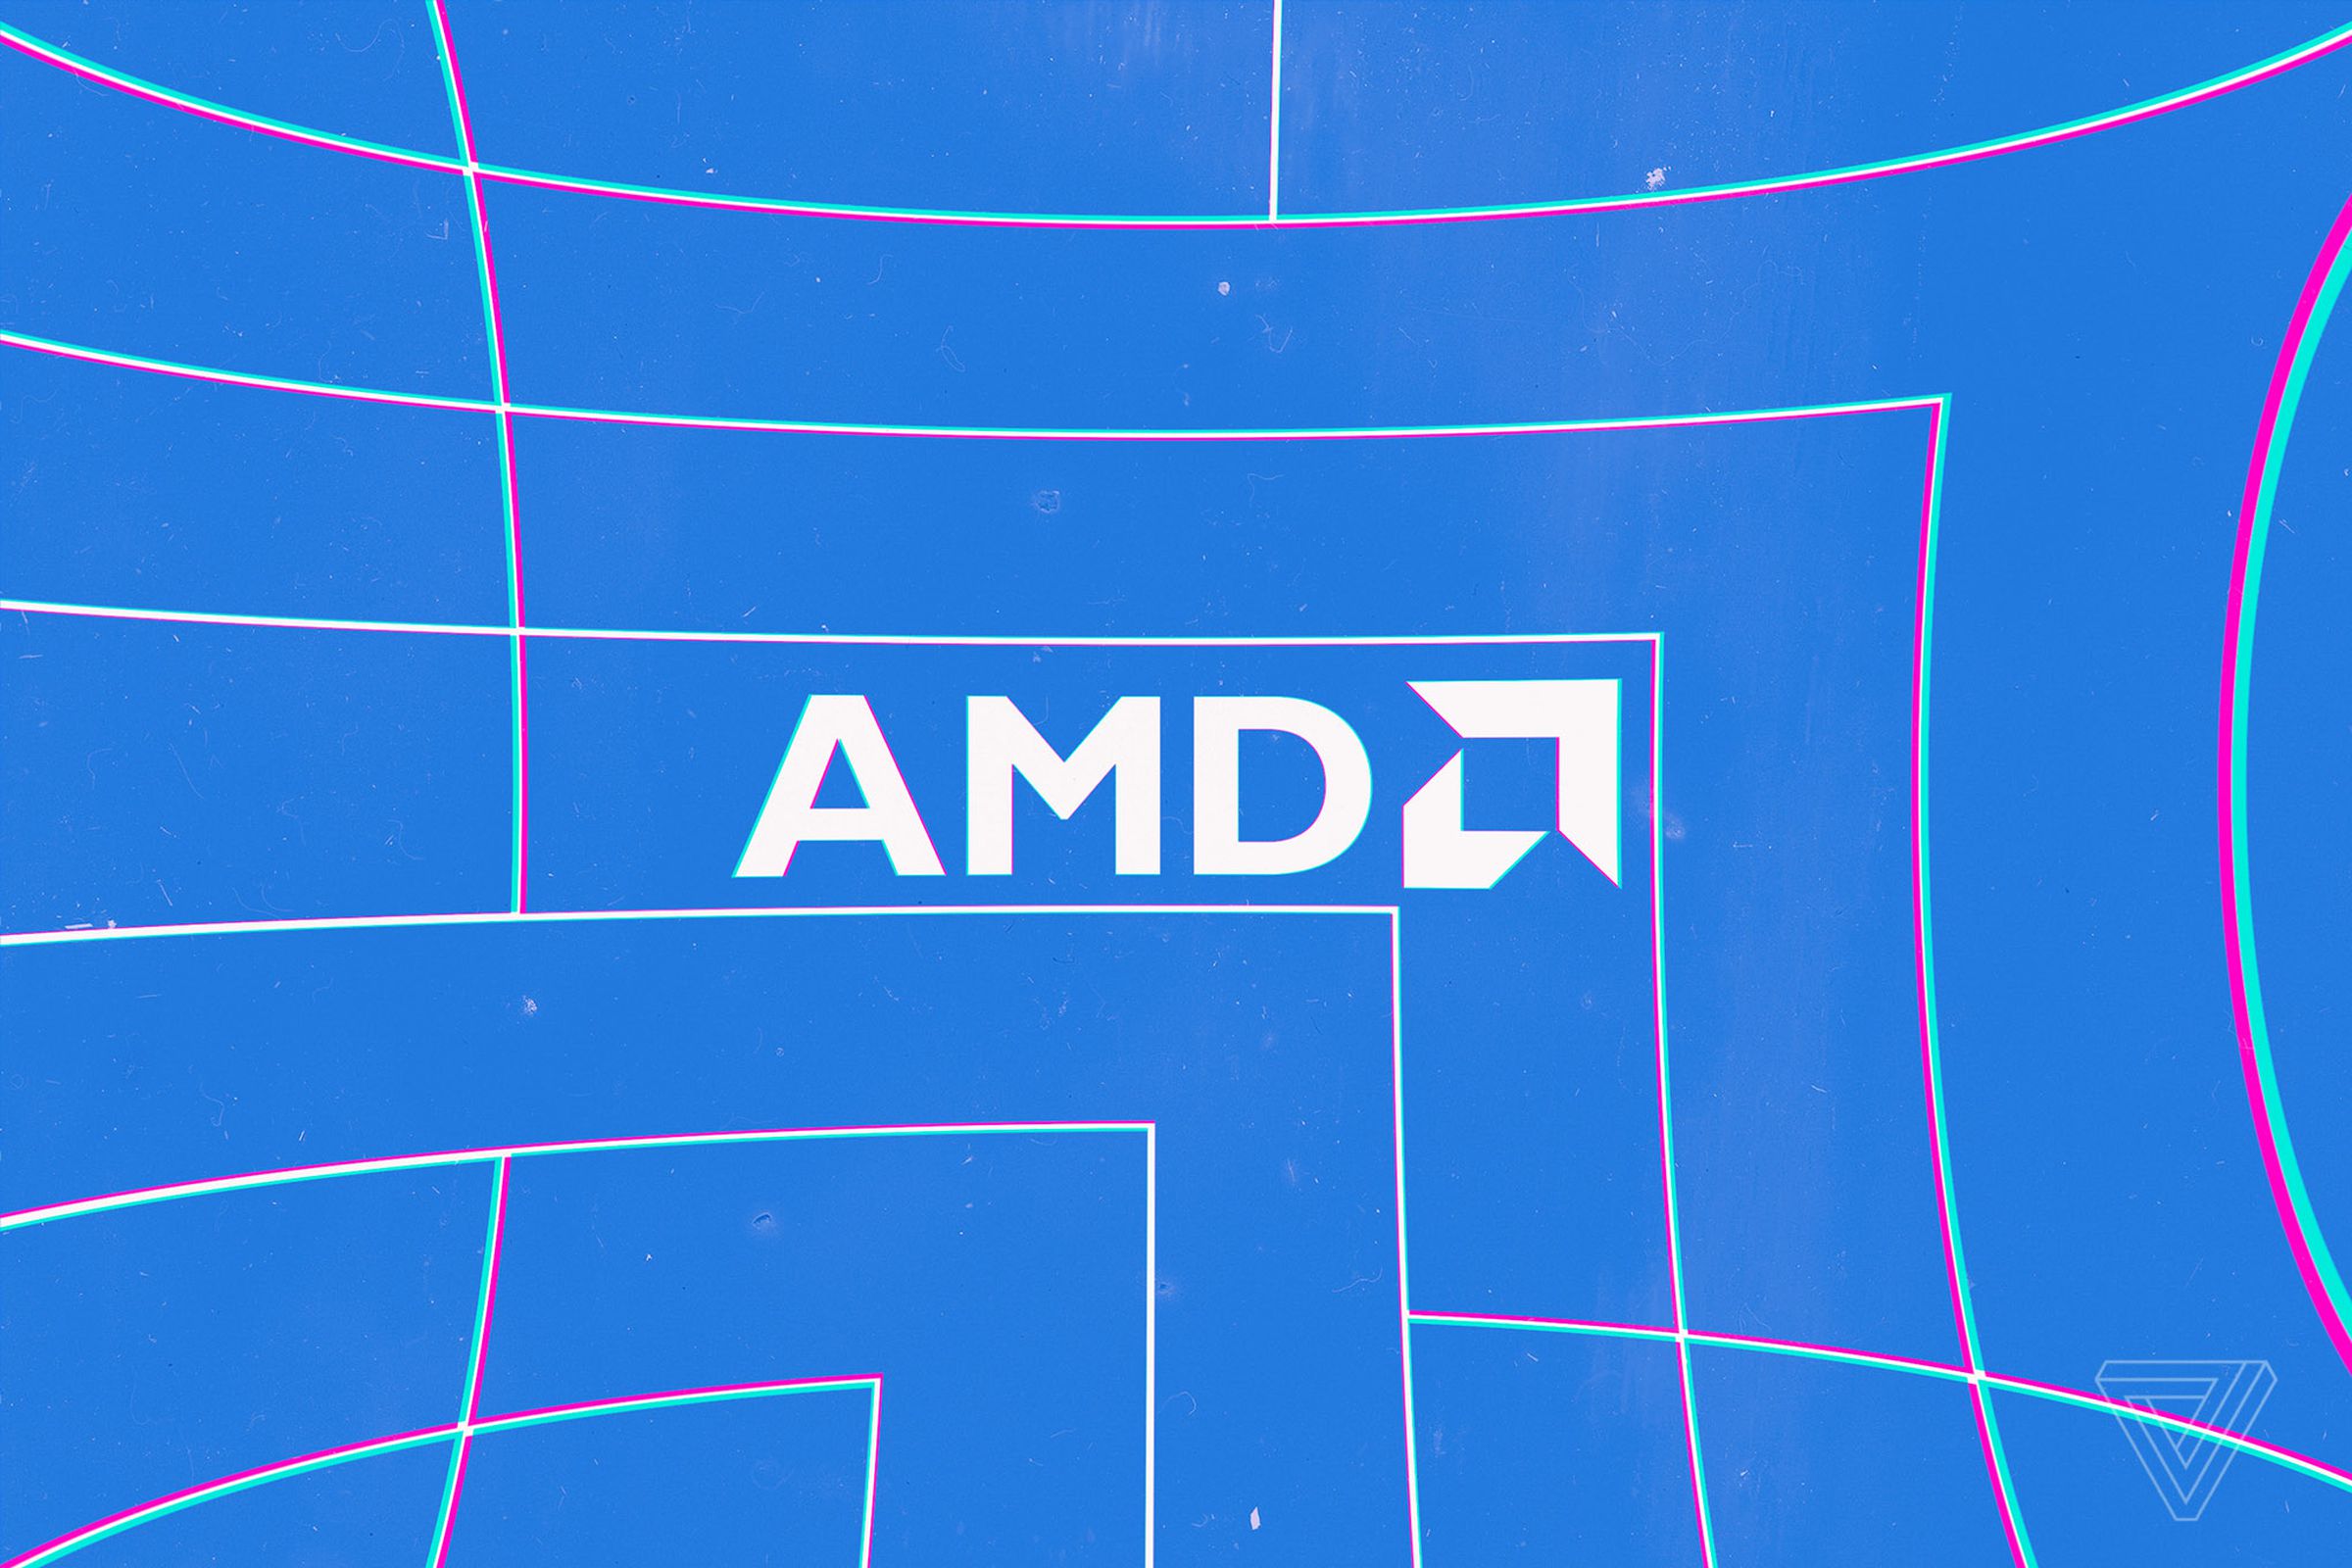 An image showing the AMD logo on a blue background